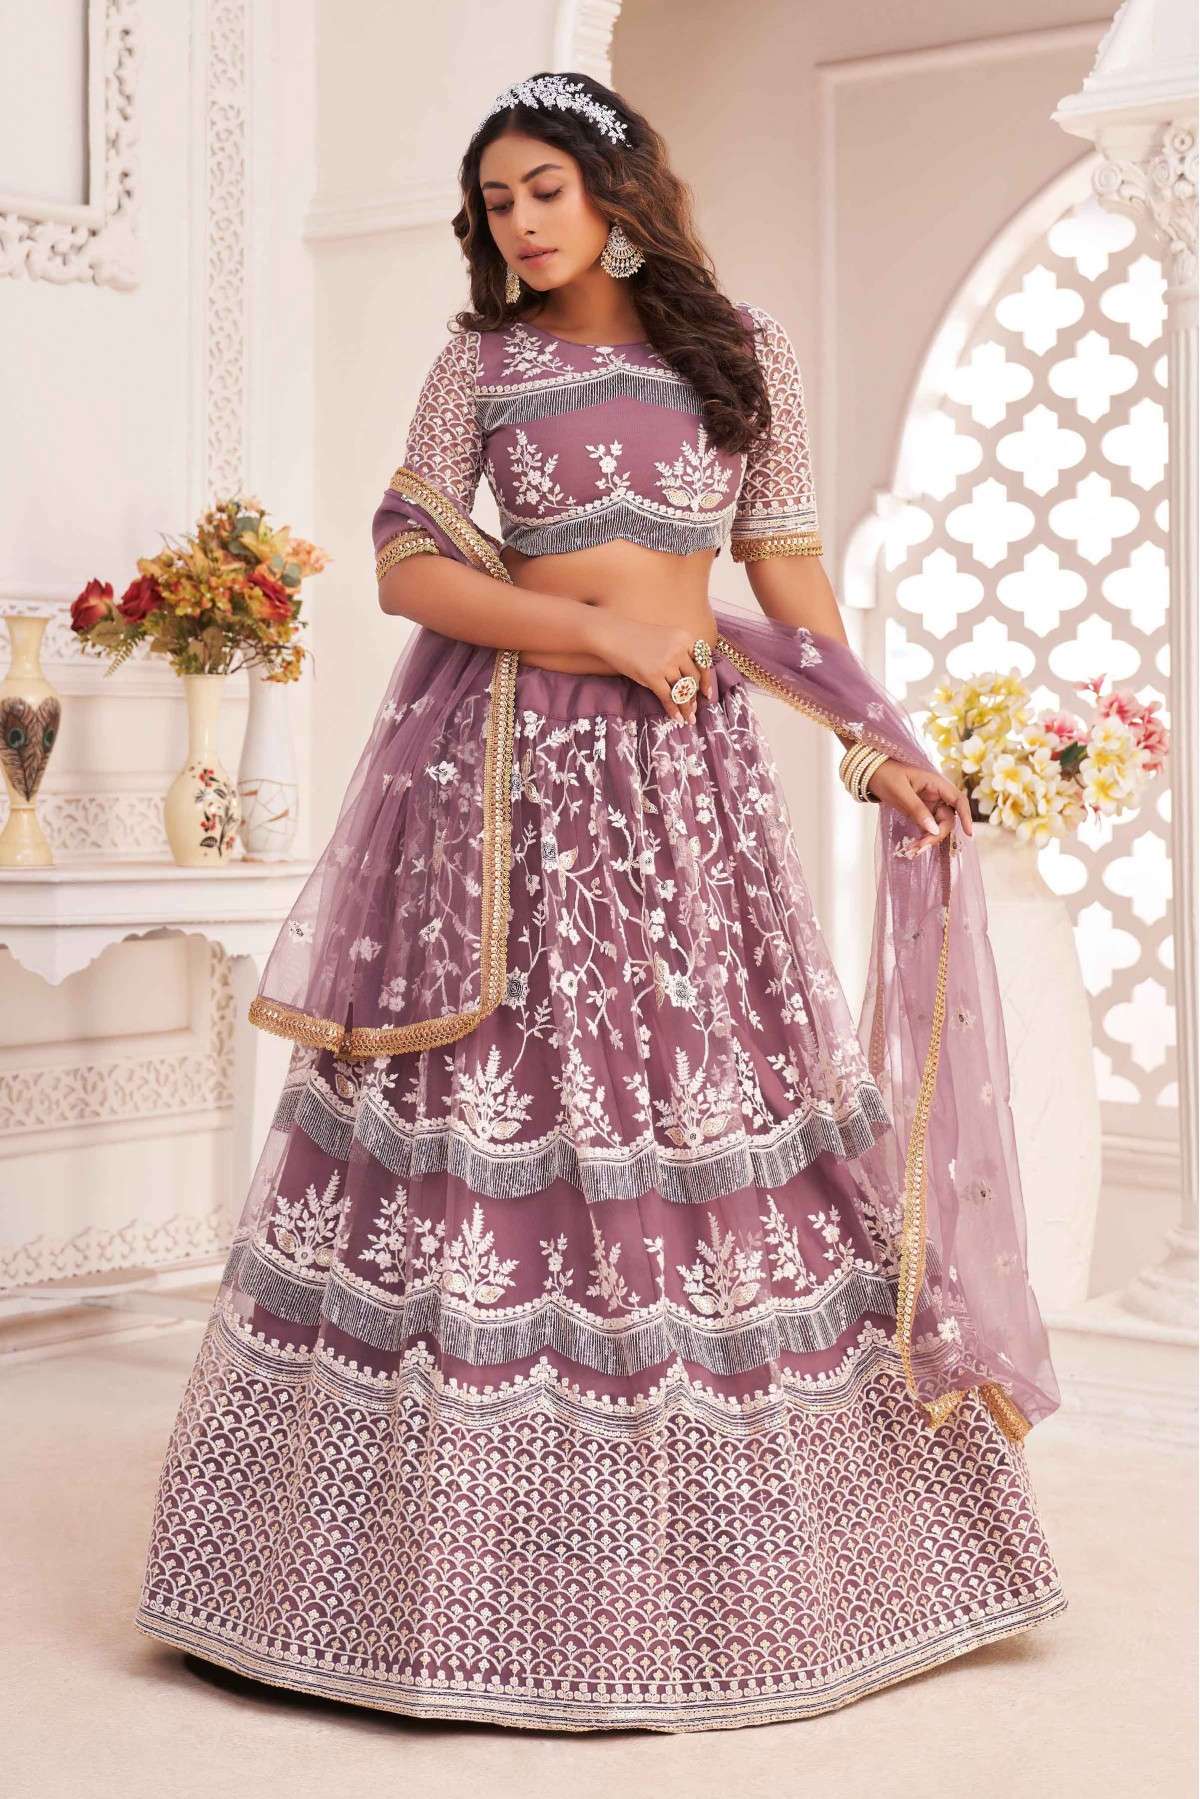 Butterfly Net Embroidery Lehenga Choli In Pink Colour - LD5416172